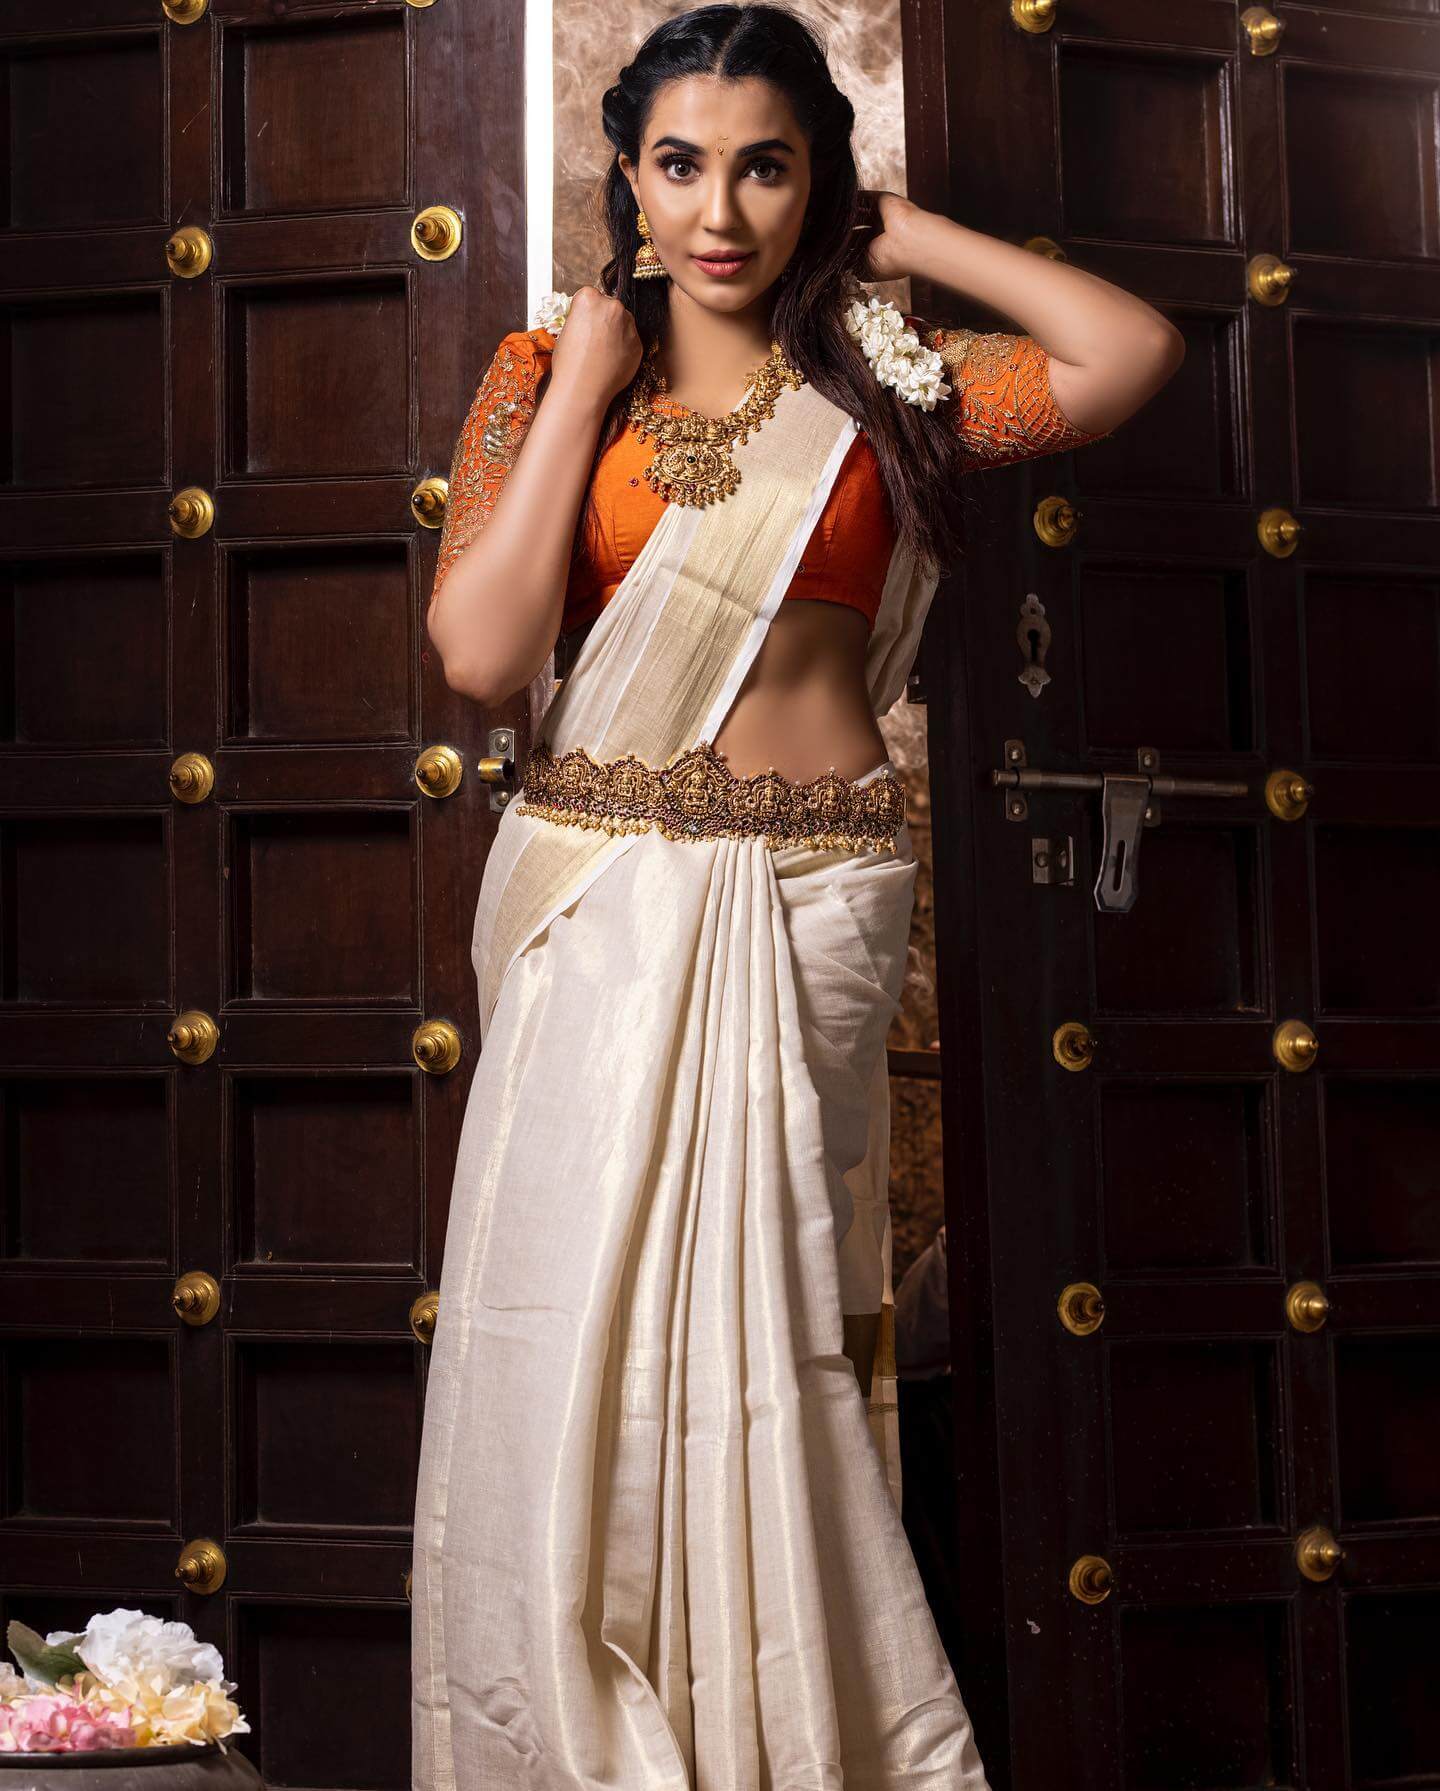 Parvathy Nair In Traditional White Kanjeevram Saree & Temple Design Jewellery South Indian Outfit Look 